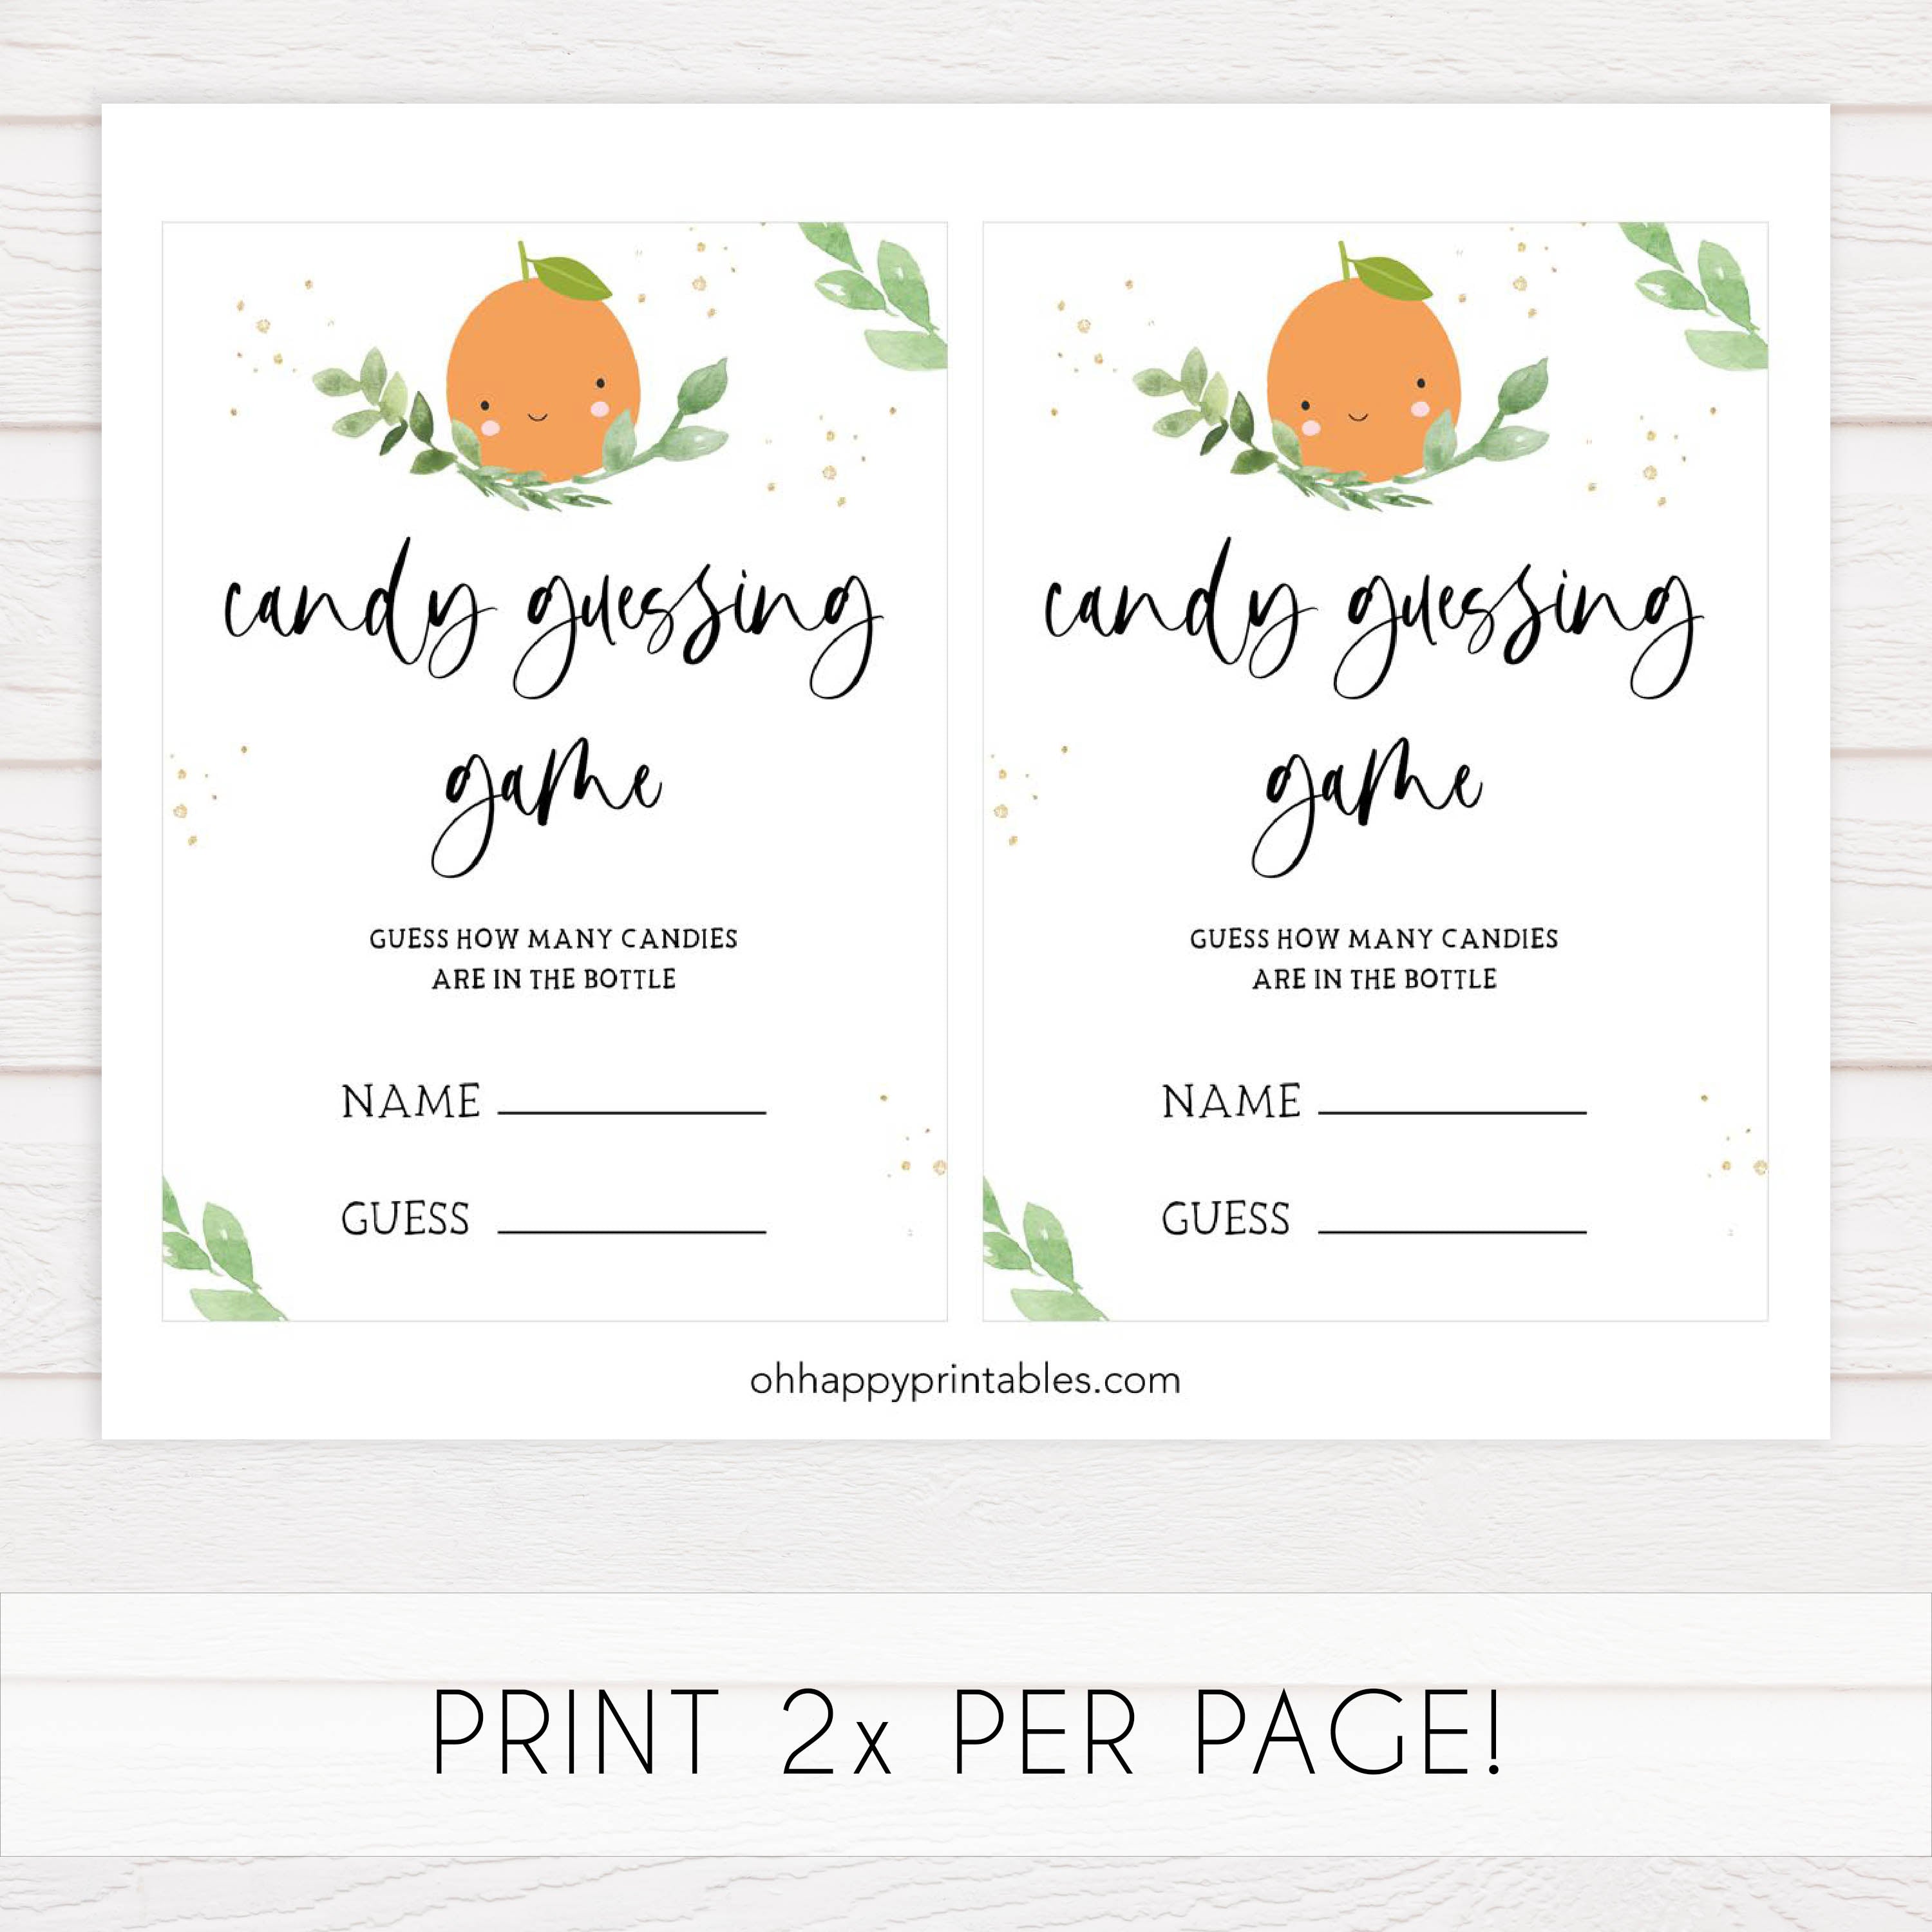 candy guessing game, Printable baby shower games, little cutie baby games, baby shower games, fun baby shower ideas, top baby shower ideas, little cutie baby shower, baby shower games, fun little cutie baby shower ideas